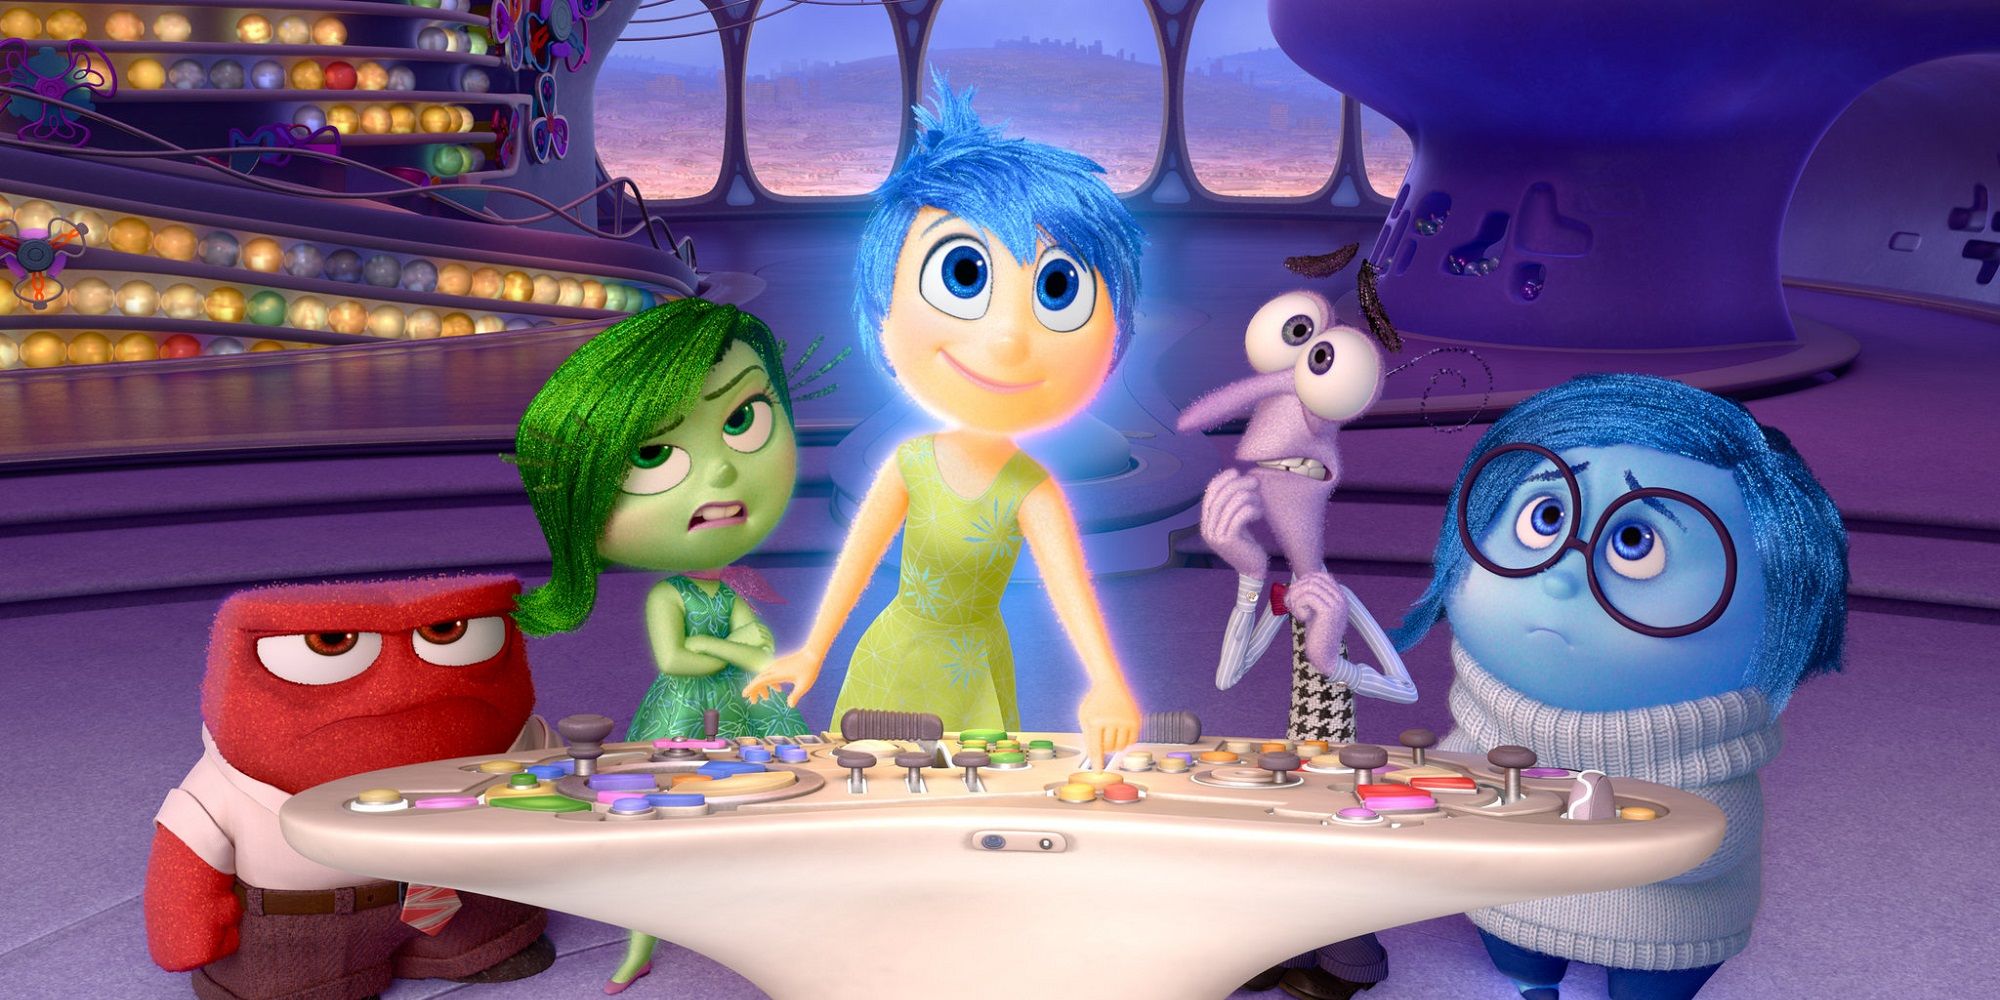 Ange, Disgust, Joy, Fear, and Sadness occupy the control panel in 'Inside Out'.